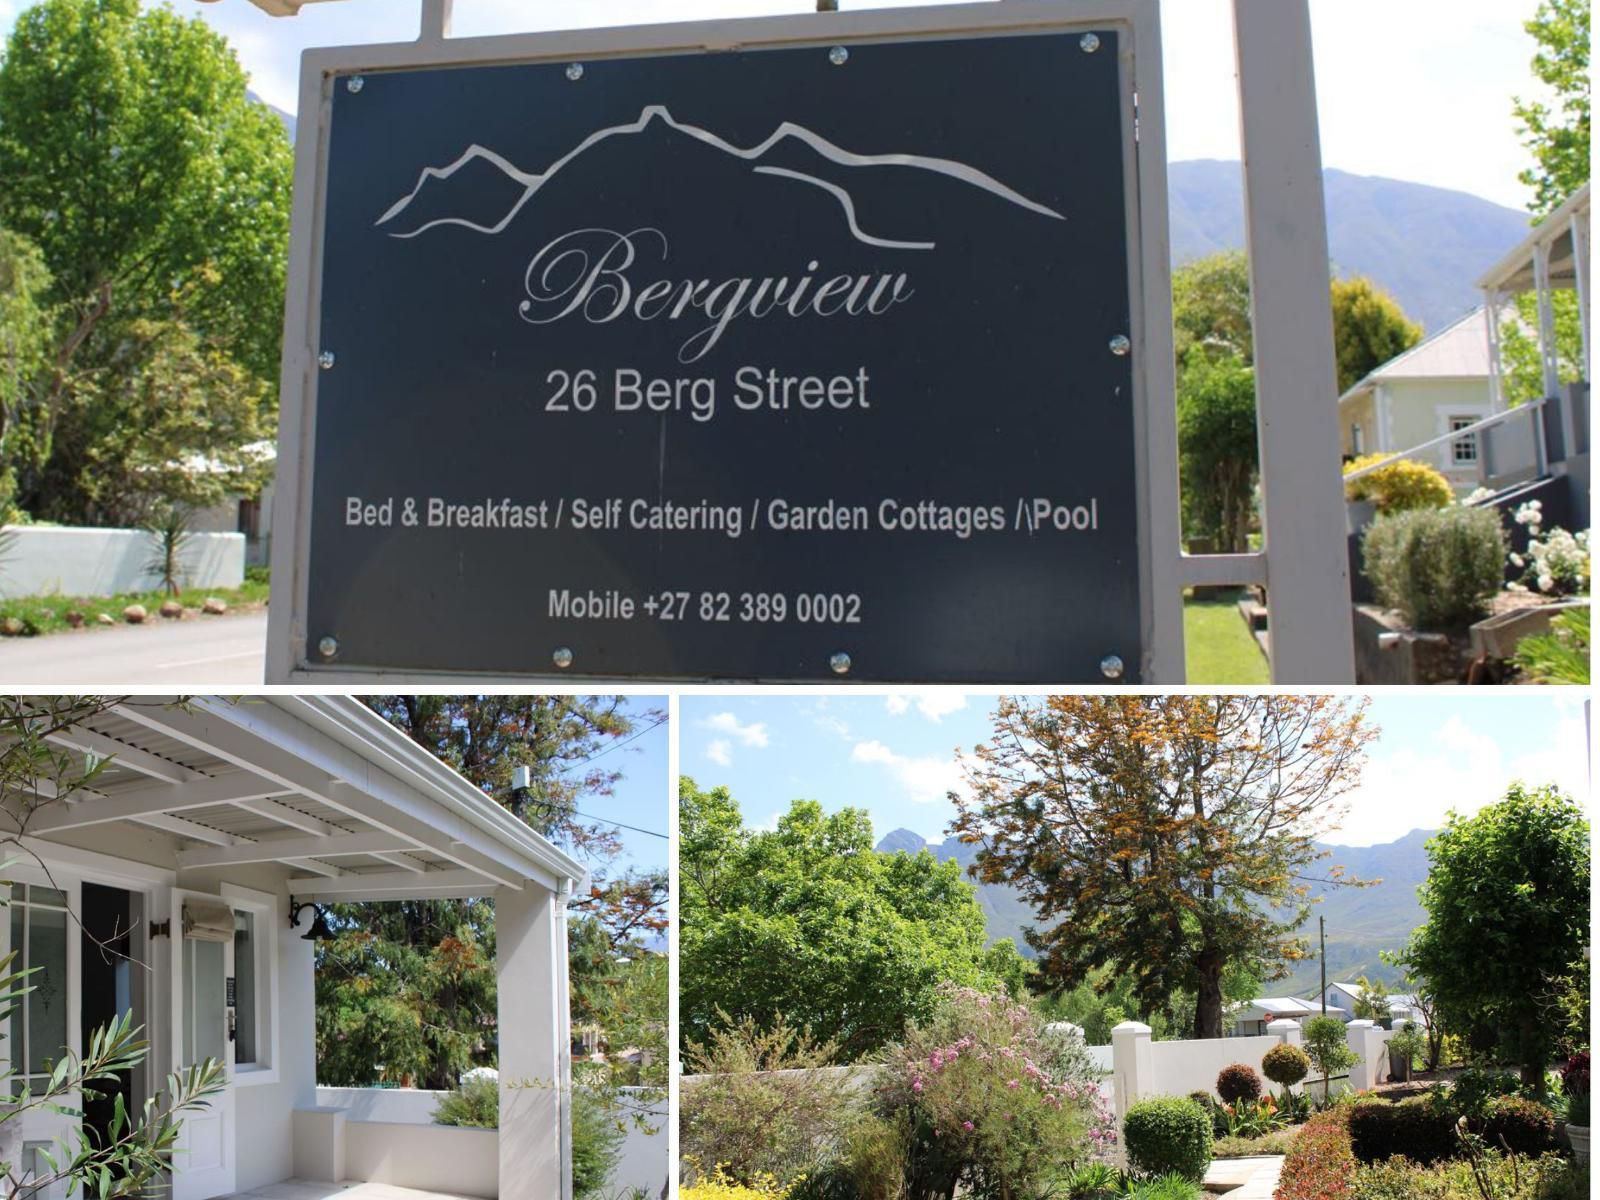 Bergview Guesthouse Swellendam Swellendam Western Cape South Africa House, Building, Architecture, Sign, Text